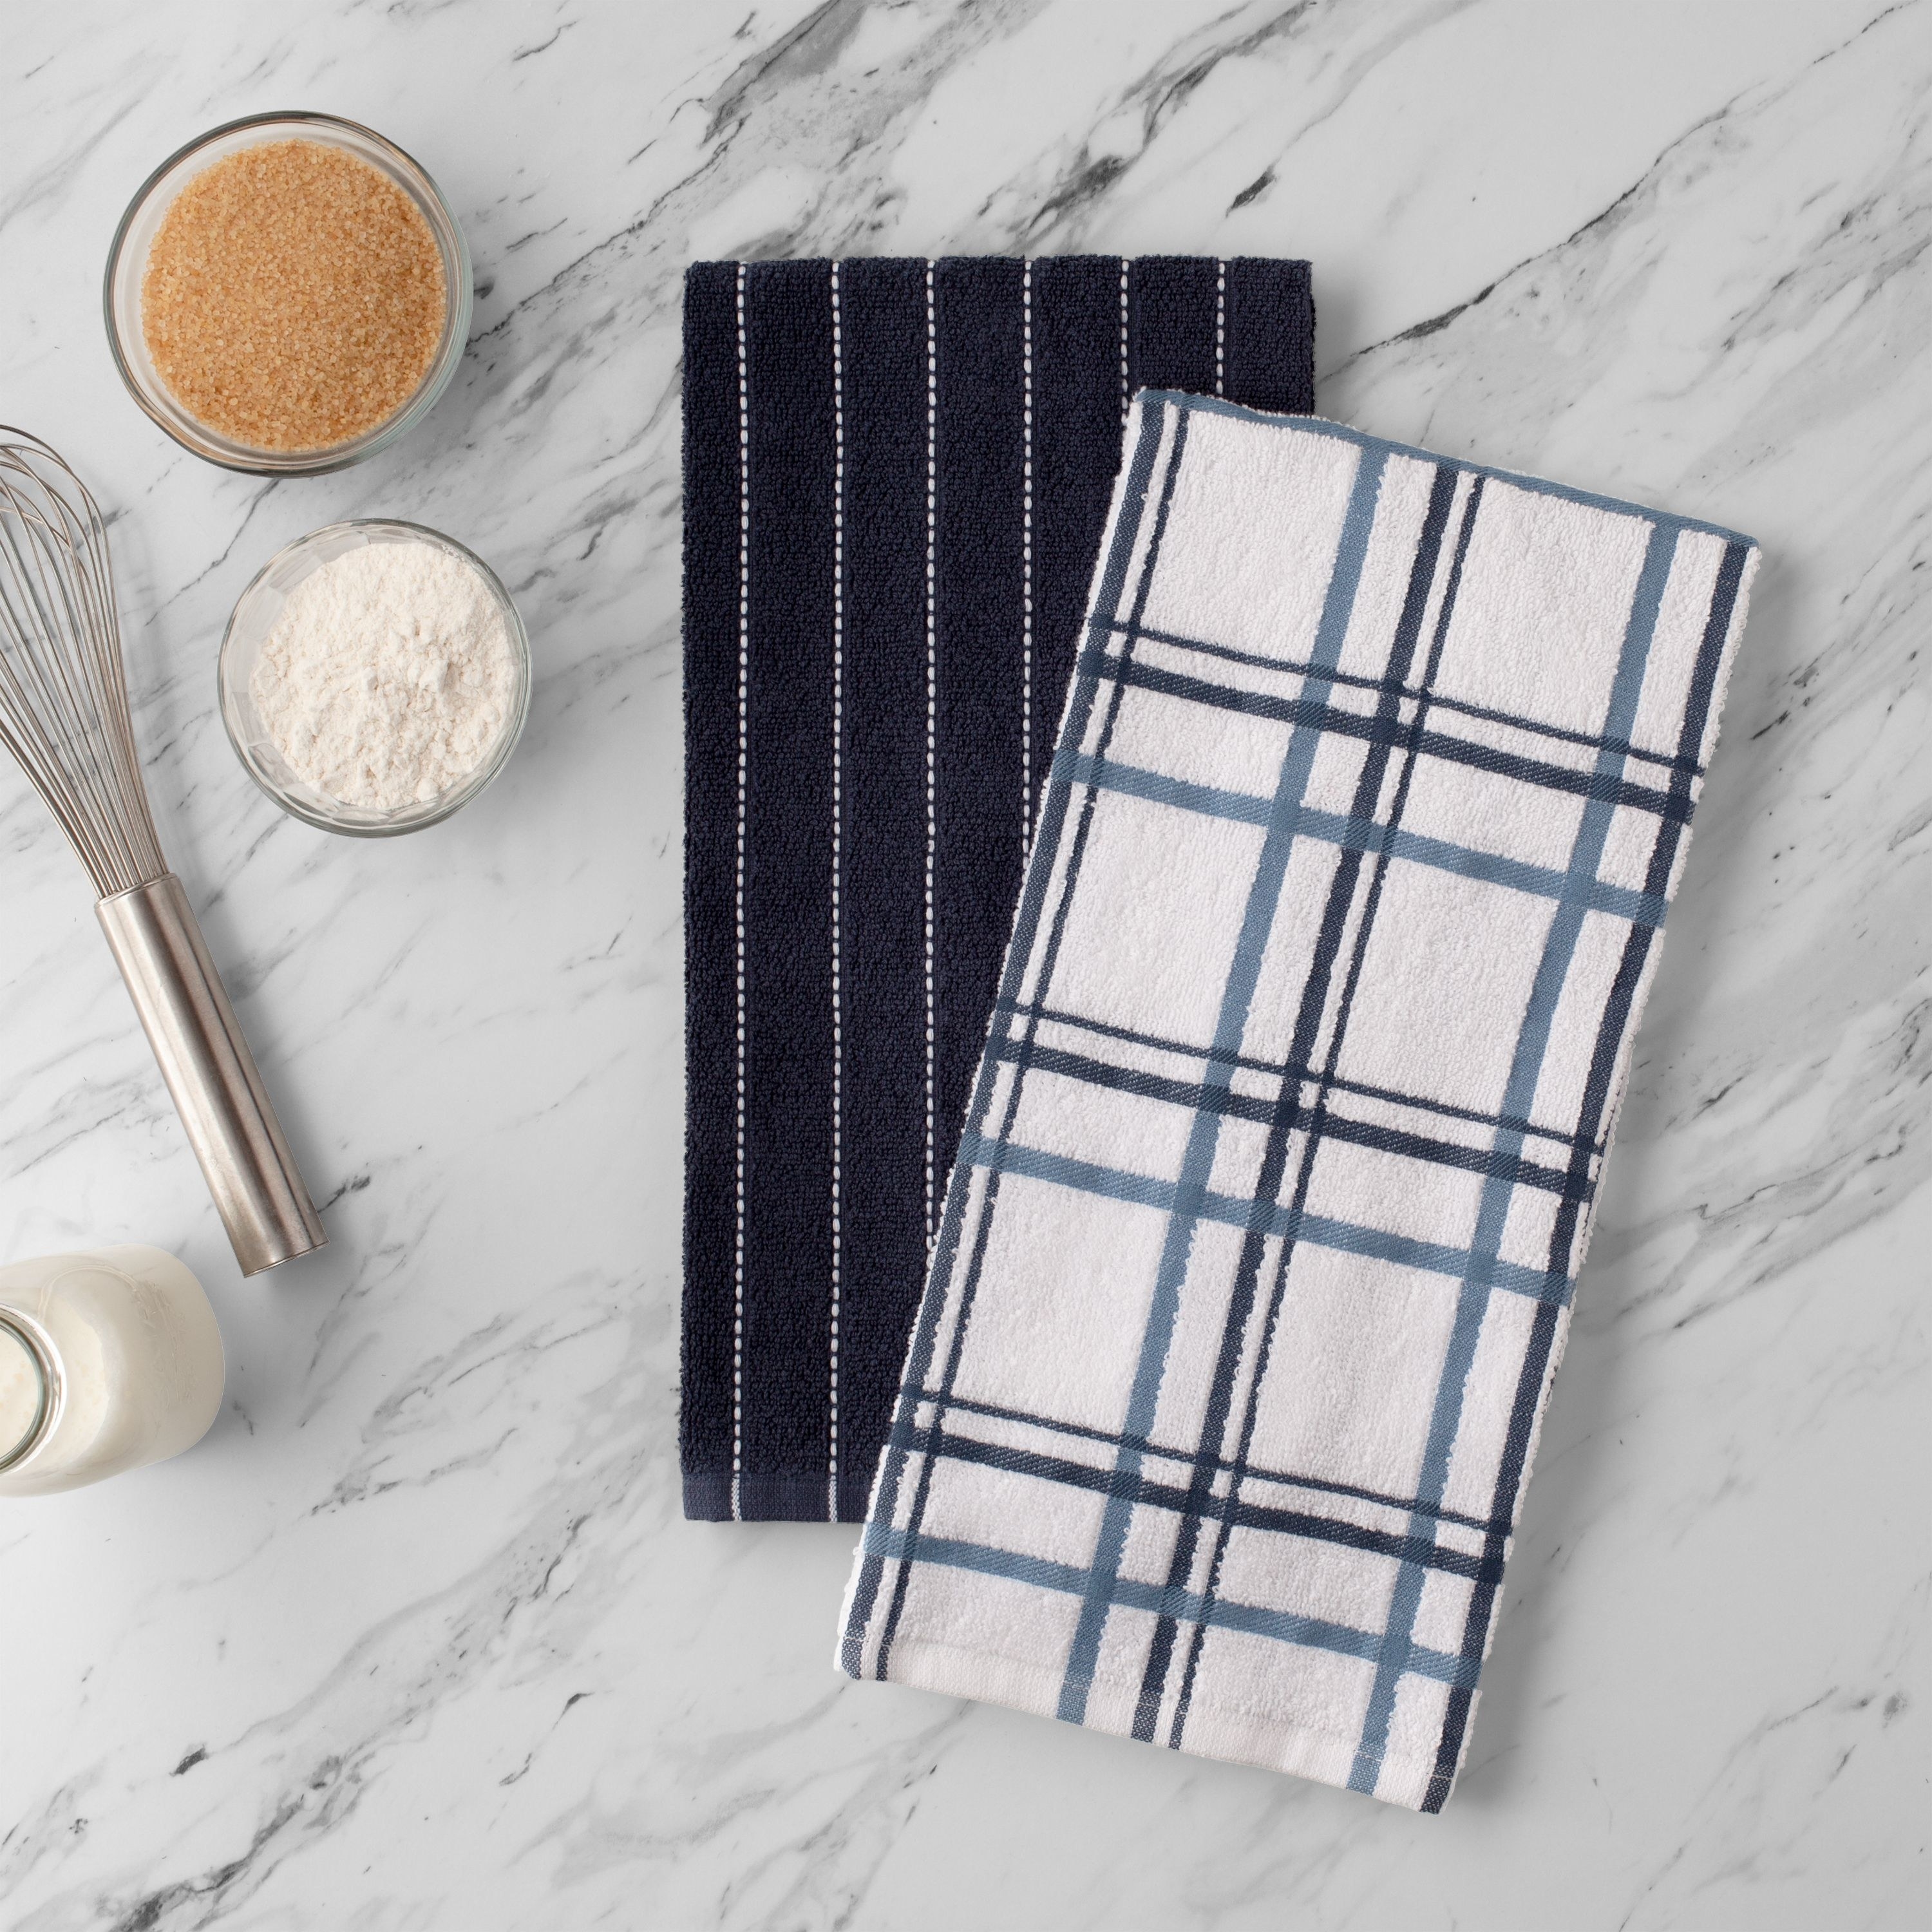 two dish towels with navy blue designs on a table